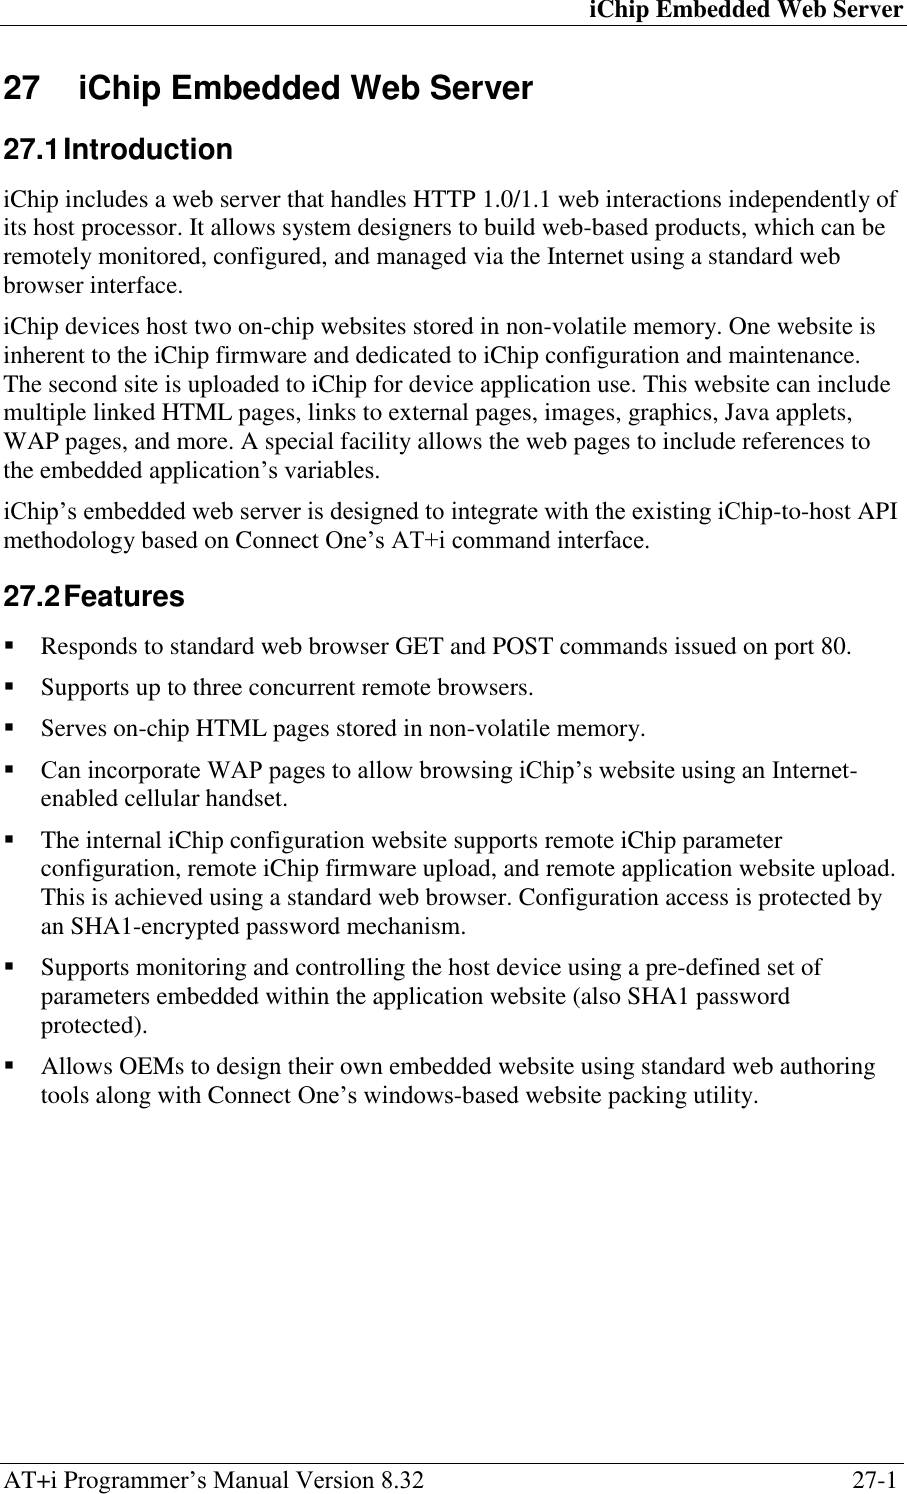 iChip Embedded Web Server AT+i Programmer‘s Manual Version 8.32  27-1 27  iChip Embedded Web Server 27.1 Introduction iChip includes a web server that handles HTTP 1.0/1.1 web interactions independently of its host processor. It allows system designers to build web-based products, which can be remotely monitored, configured, and managed via the Internet using a standard web browser interface. iChip devices host two on-chip websites stored in non-volatile memory. One website is inherent to the iChip firmware and dedicated to iChip configuration and maintenance. The second site is uploaded to iChip for device application use. This website can include multiple linked HTML pages, links to external pages, images, graphics, Java applets, WAP pages, and more. A special facility allows the web pages to include references to the embedded application‘s variables. iChip‘s embedded web server is designed to integrate with the existing iChip-to-host API methodology based on Connect One‘s AT+i command interface. 27.2 Features  Responds to standard web browser GET and POST commands issued on port 80.  Supports up to three concurrent remote browsers.  Serves on-chip HTML pages stored in non-volatile memory.  Can incorporate WAP pages to allow browsing iChip‘s website using an Internet-enabled cellular handset.  The internal iChip configuration website supports remote iChip parameter configuration, remote iChip firmware upload, and remote application website upload. This is achieved using a standard web browser. Configuration access is protected by an SHA1-encrypted password mechanism.  Supports monitoring and controlling the host device using a pre-defined set of parameters embedded within the application website (also SHA1 password protected).  Allows OEMs to design their own embedded website using standard web authoring tools along with Connect One‘s windows-based website packing utility.  